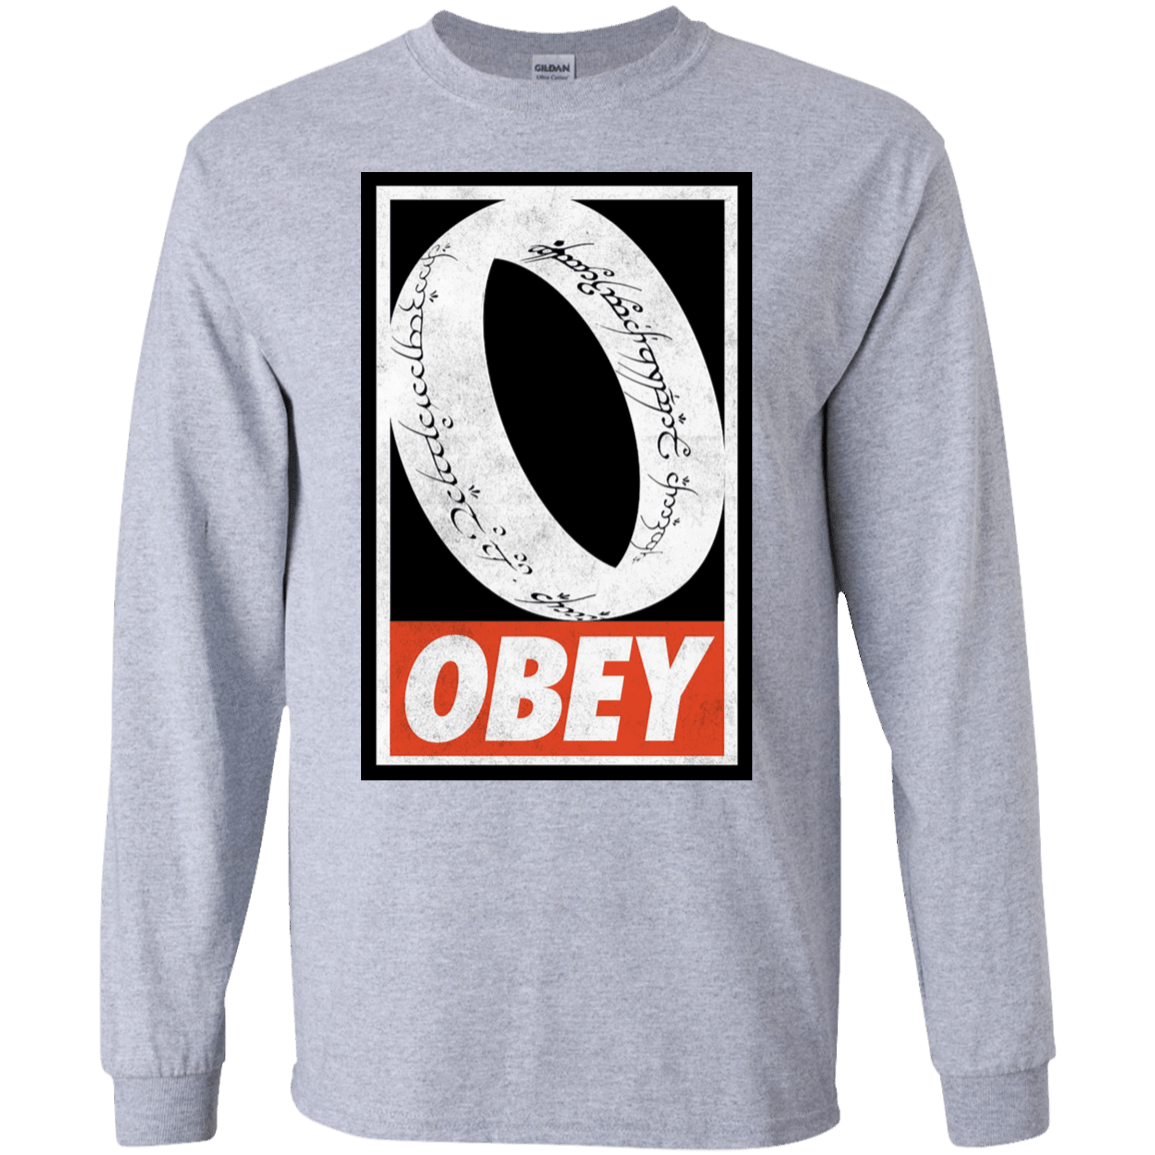 T-Shirts Sport Grey / S Obey One Ring Men's Long Sleeve T-Shirt